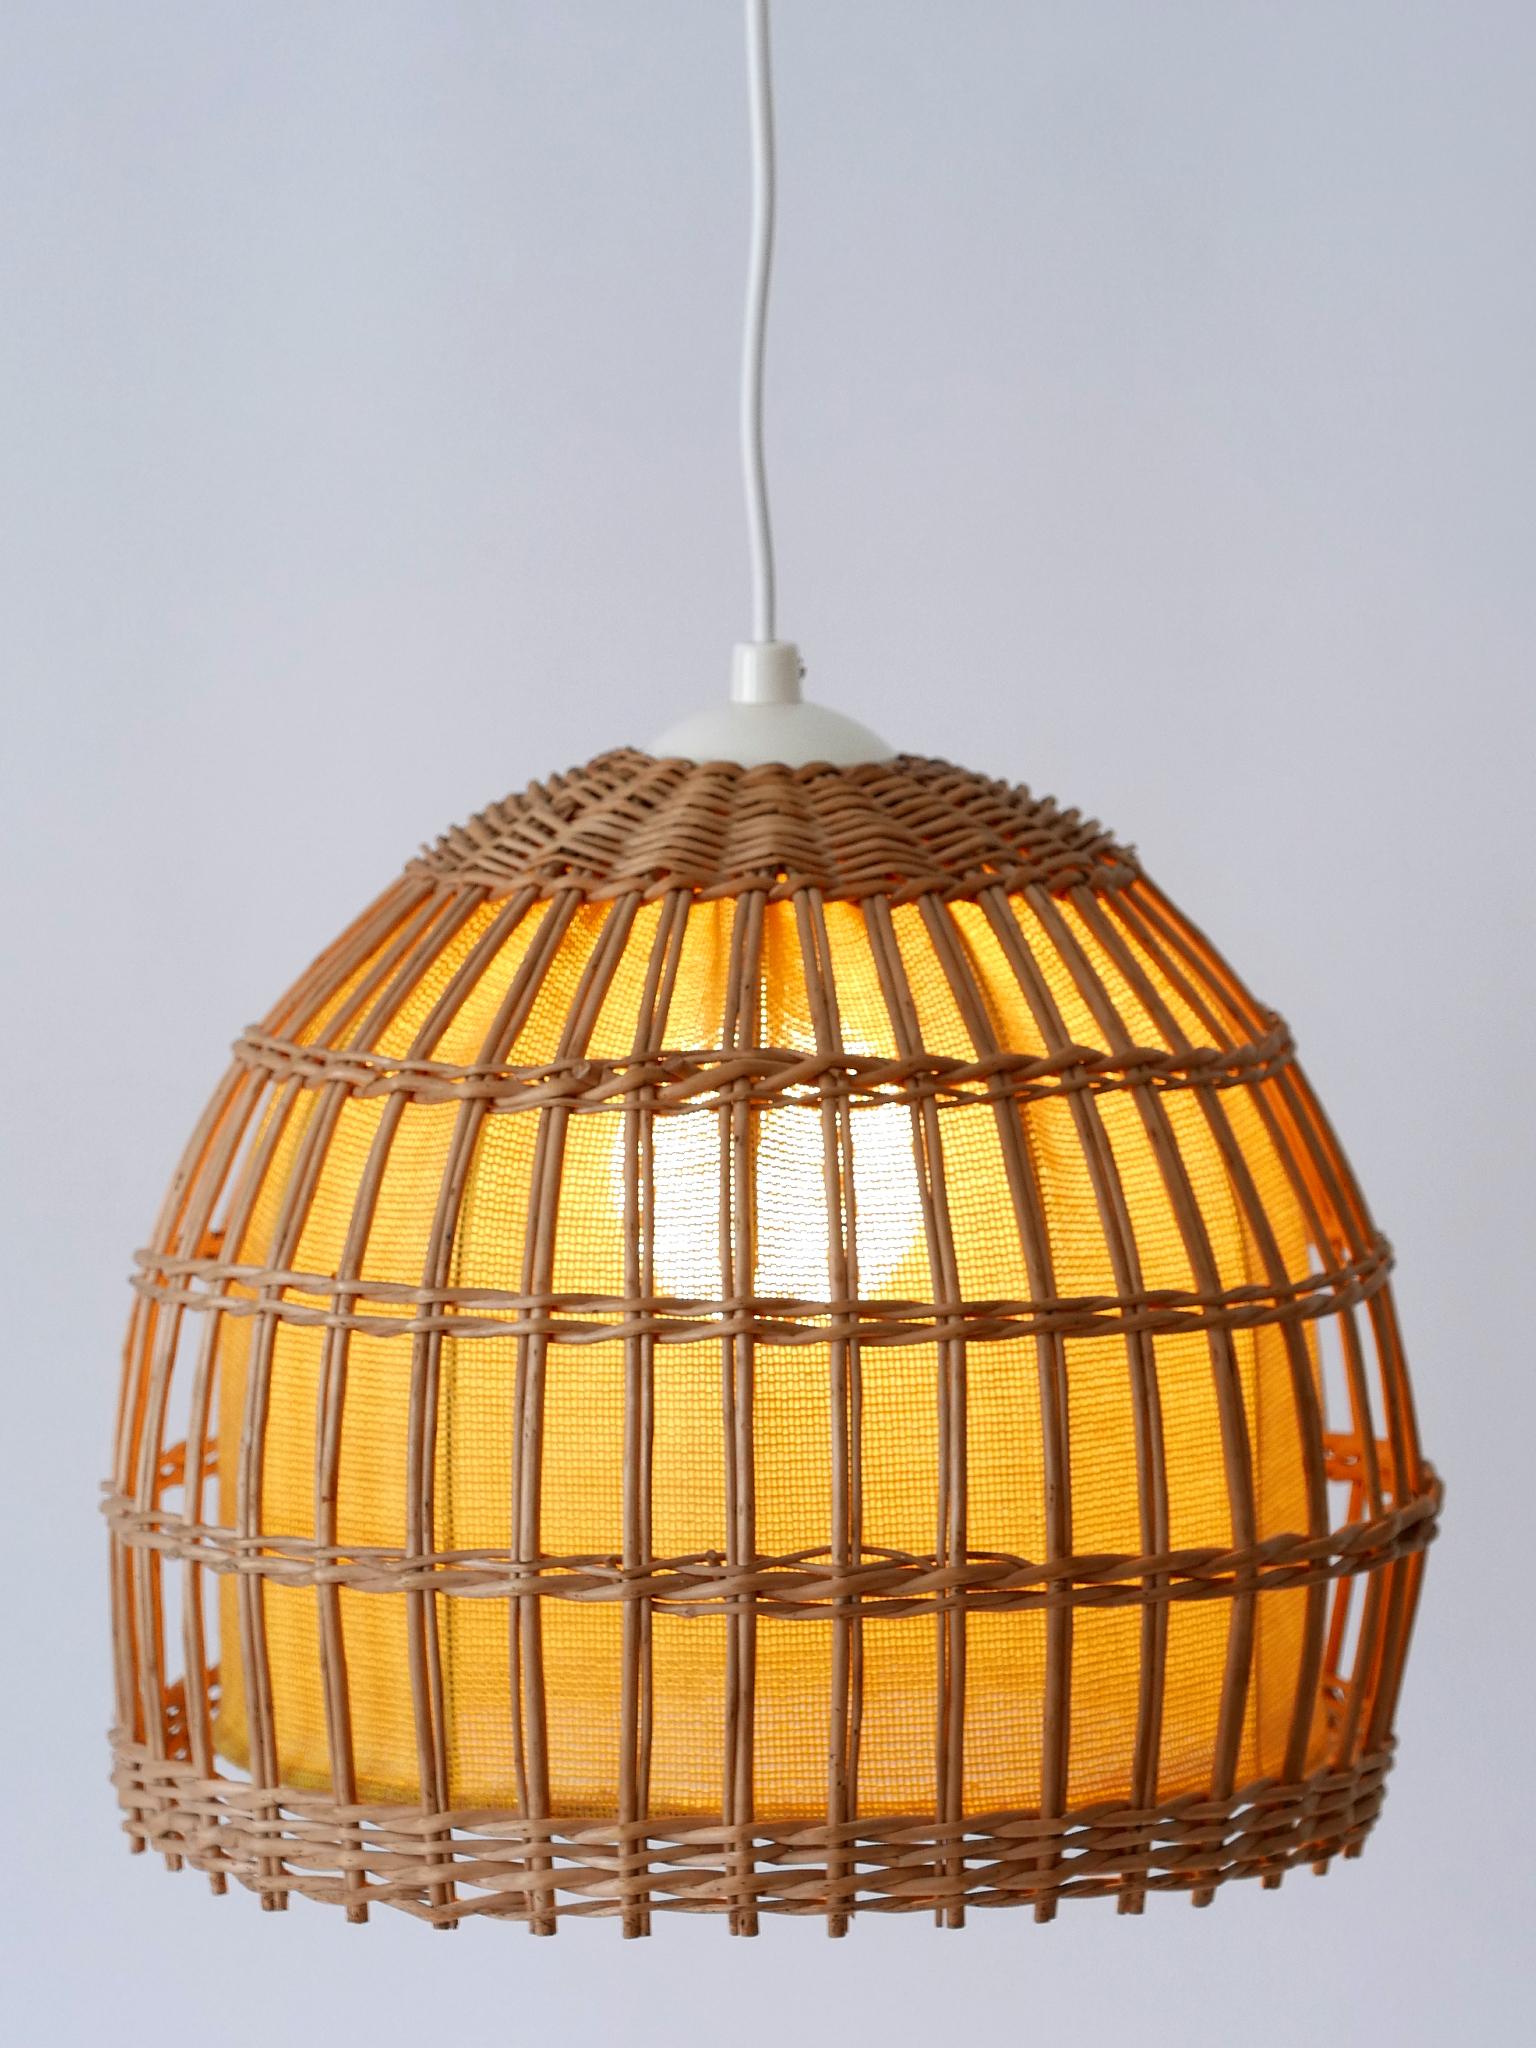 Mid-20th Century Mid-Century Modern Rattan Pendant Lamp or Hanging Light Germany 1960s For Sale